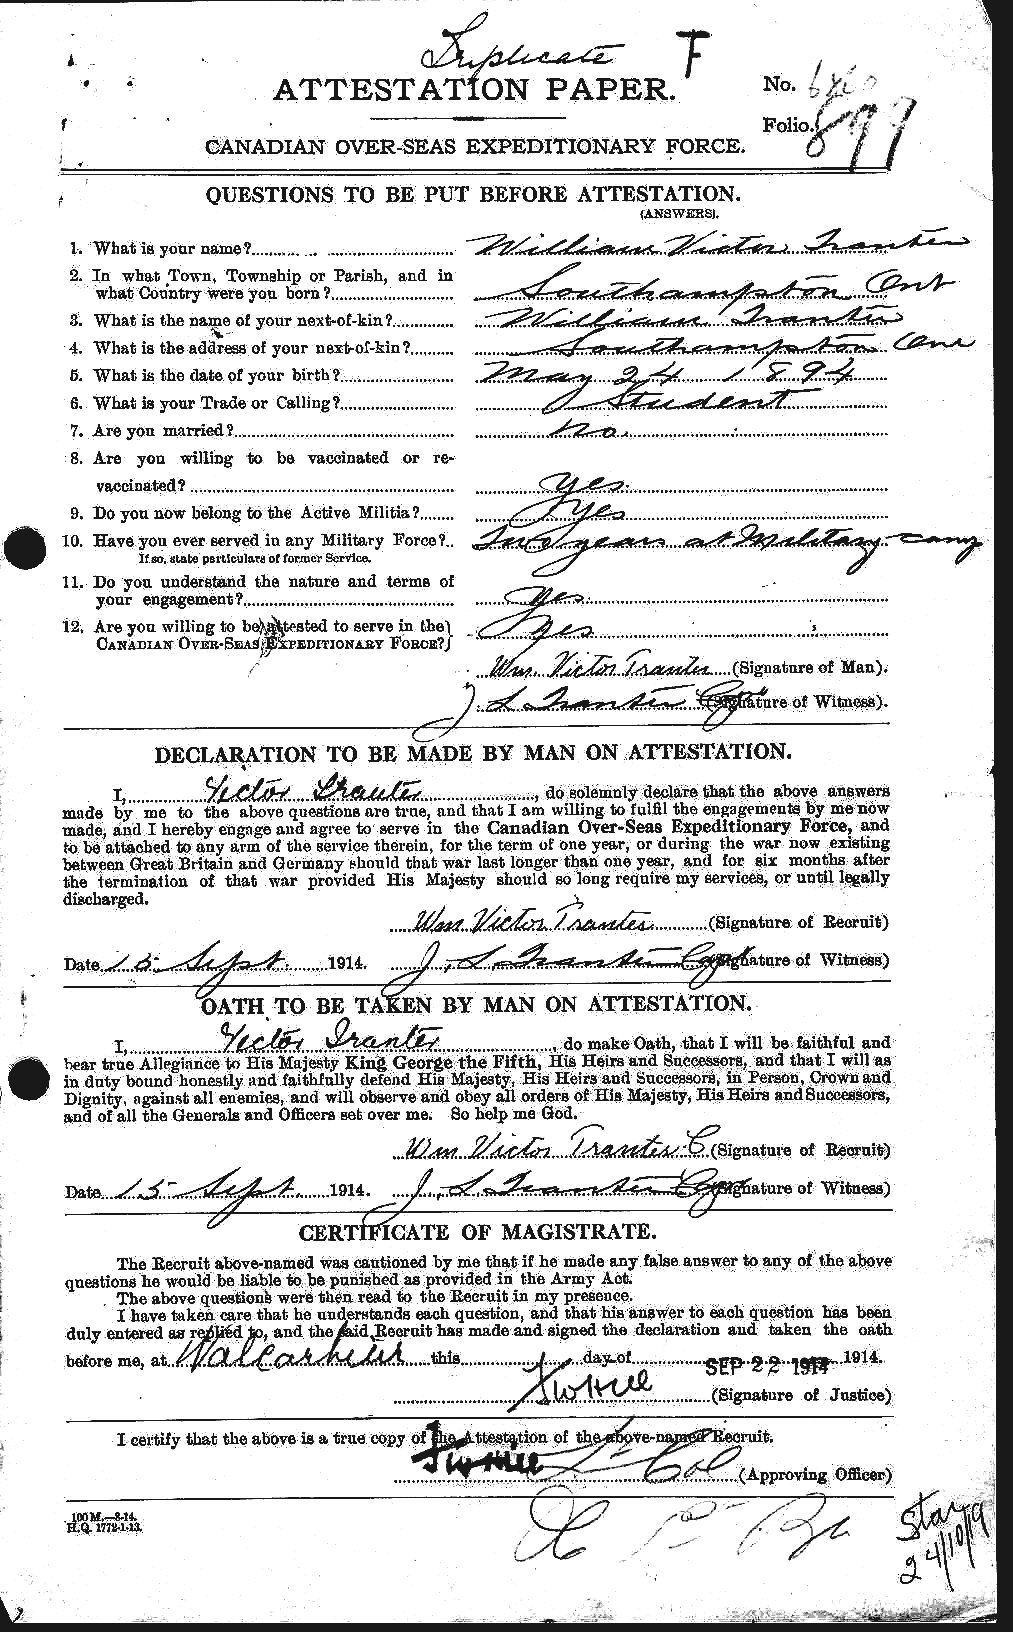 Personnel Records of the First World War - CEF 638619a